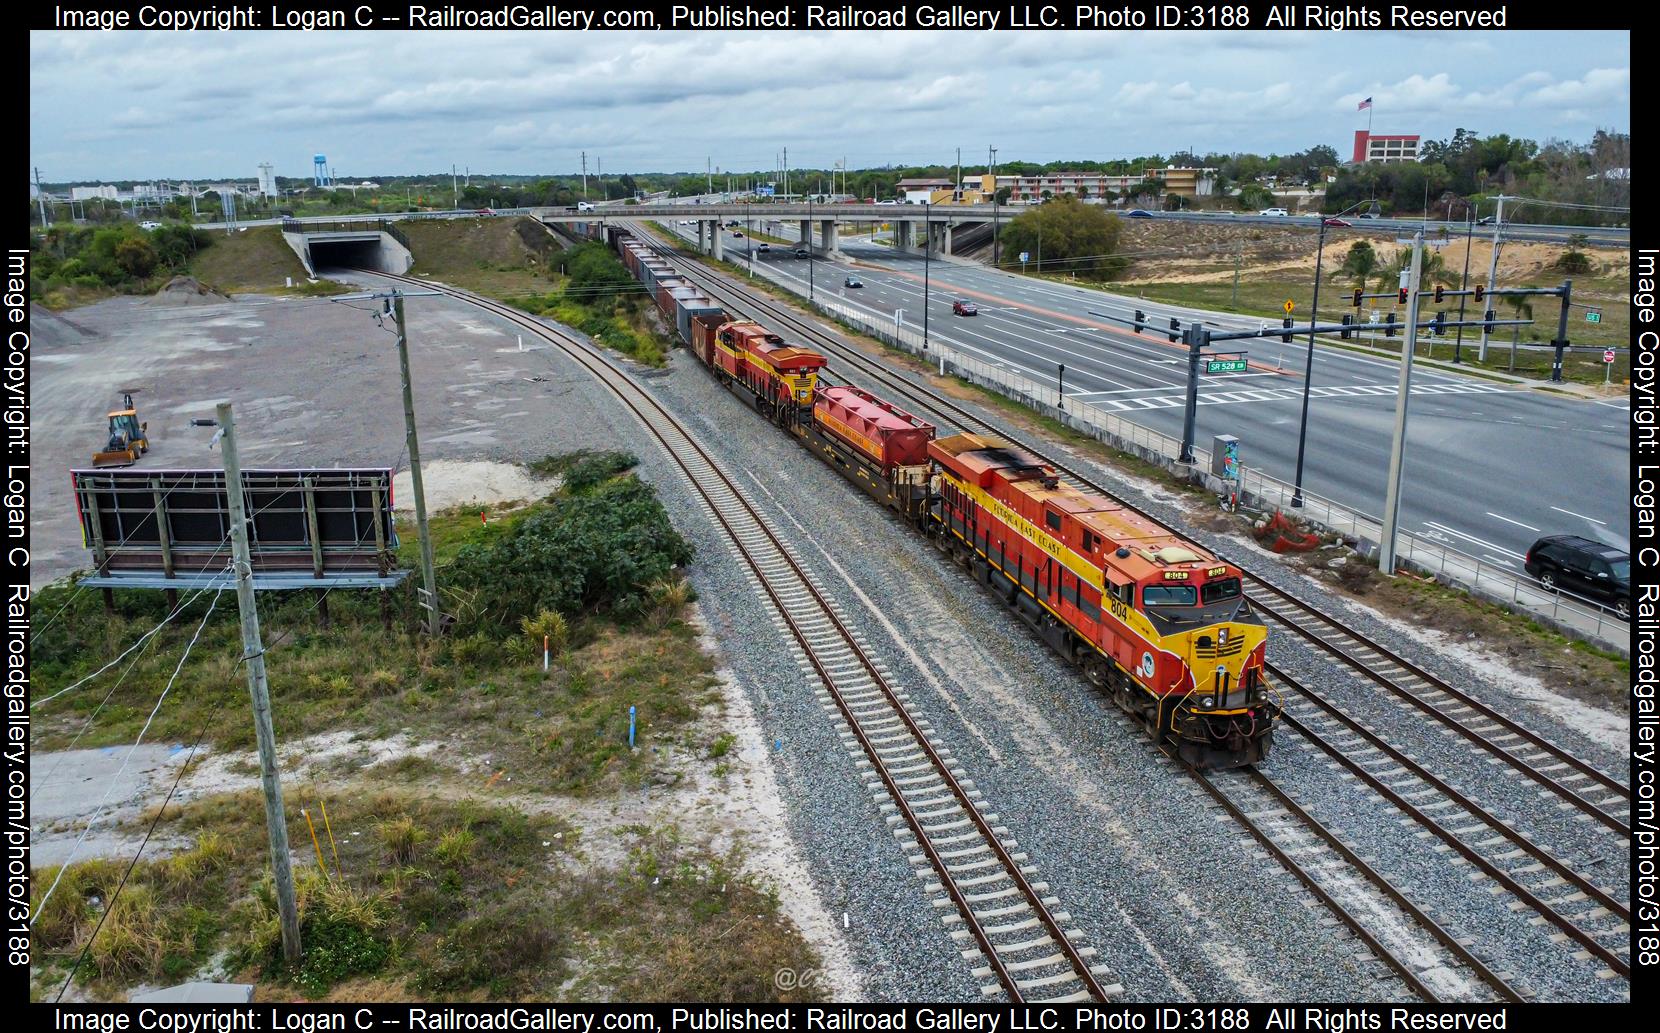 FEC 804 FEC 821 is a class GE ES44C4 and  is pictured in City Point, Florida, USA.  This was taken along the FEC Mainline on the Florida East Coast Railway. Photo Copyright: Logan C uploaded to Railroad Gallery on 03/07/2024. This photograph of FEC 804 FEC 821 was taken on Tuesday, March 05, 2024. All Rights Reserved. 